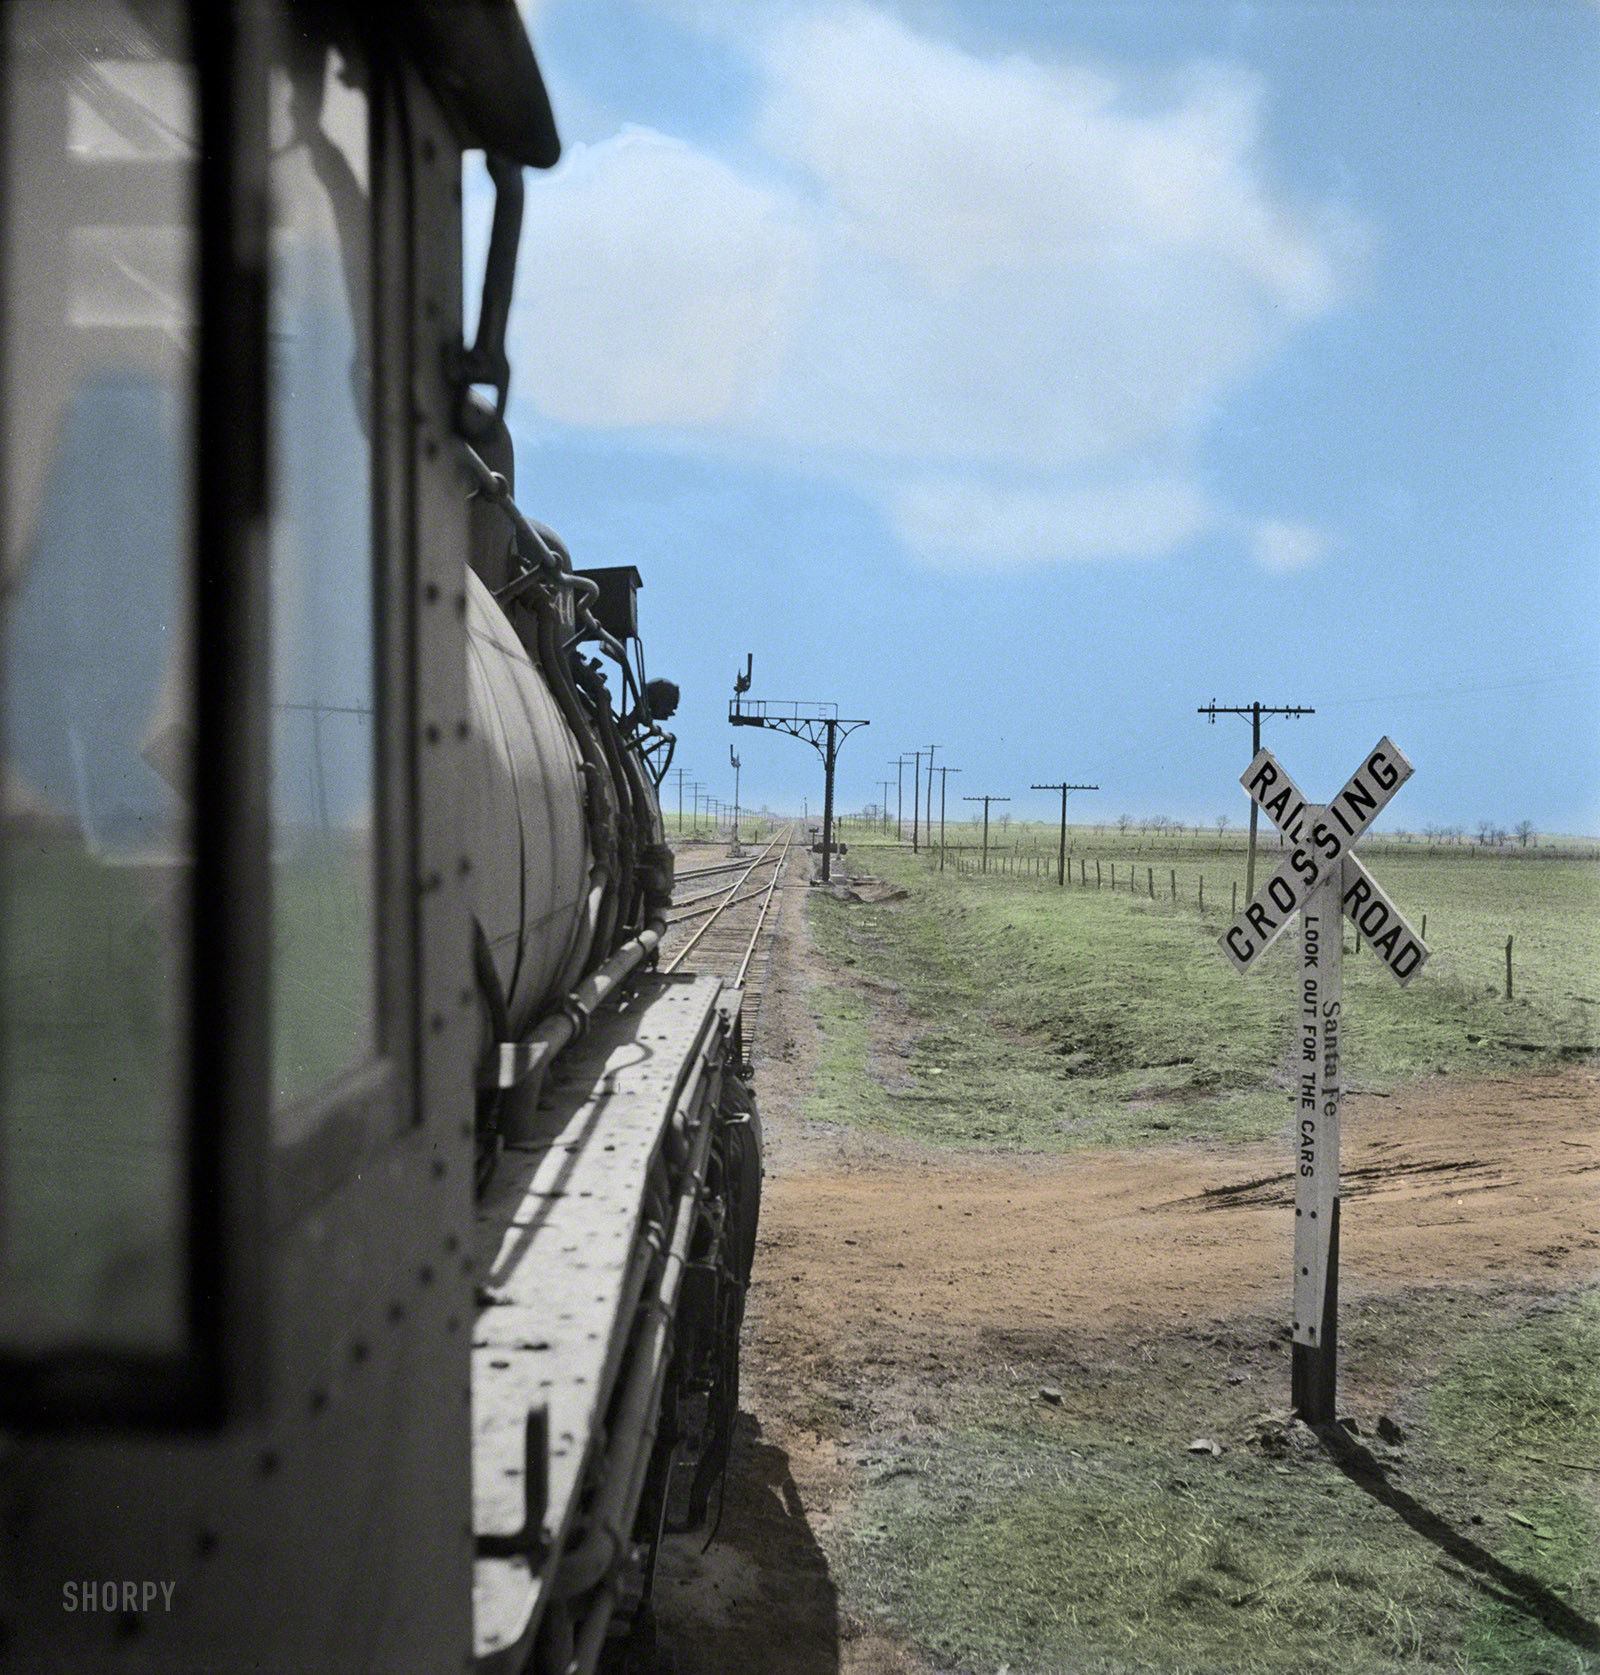 Colorized from this Shorpy original. March 1943 Kiowa (vicinity) Kansas. View full size.